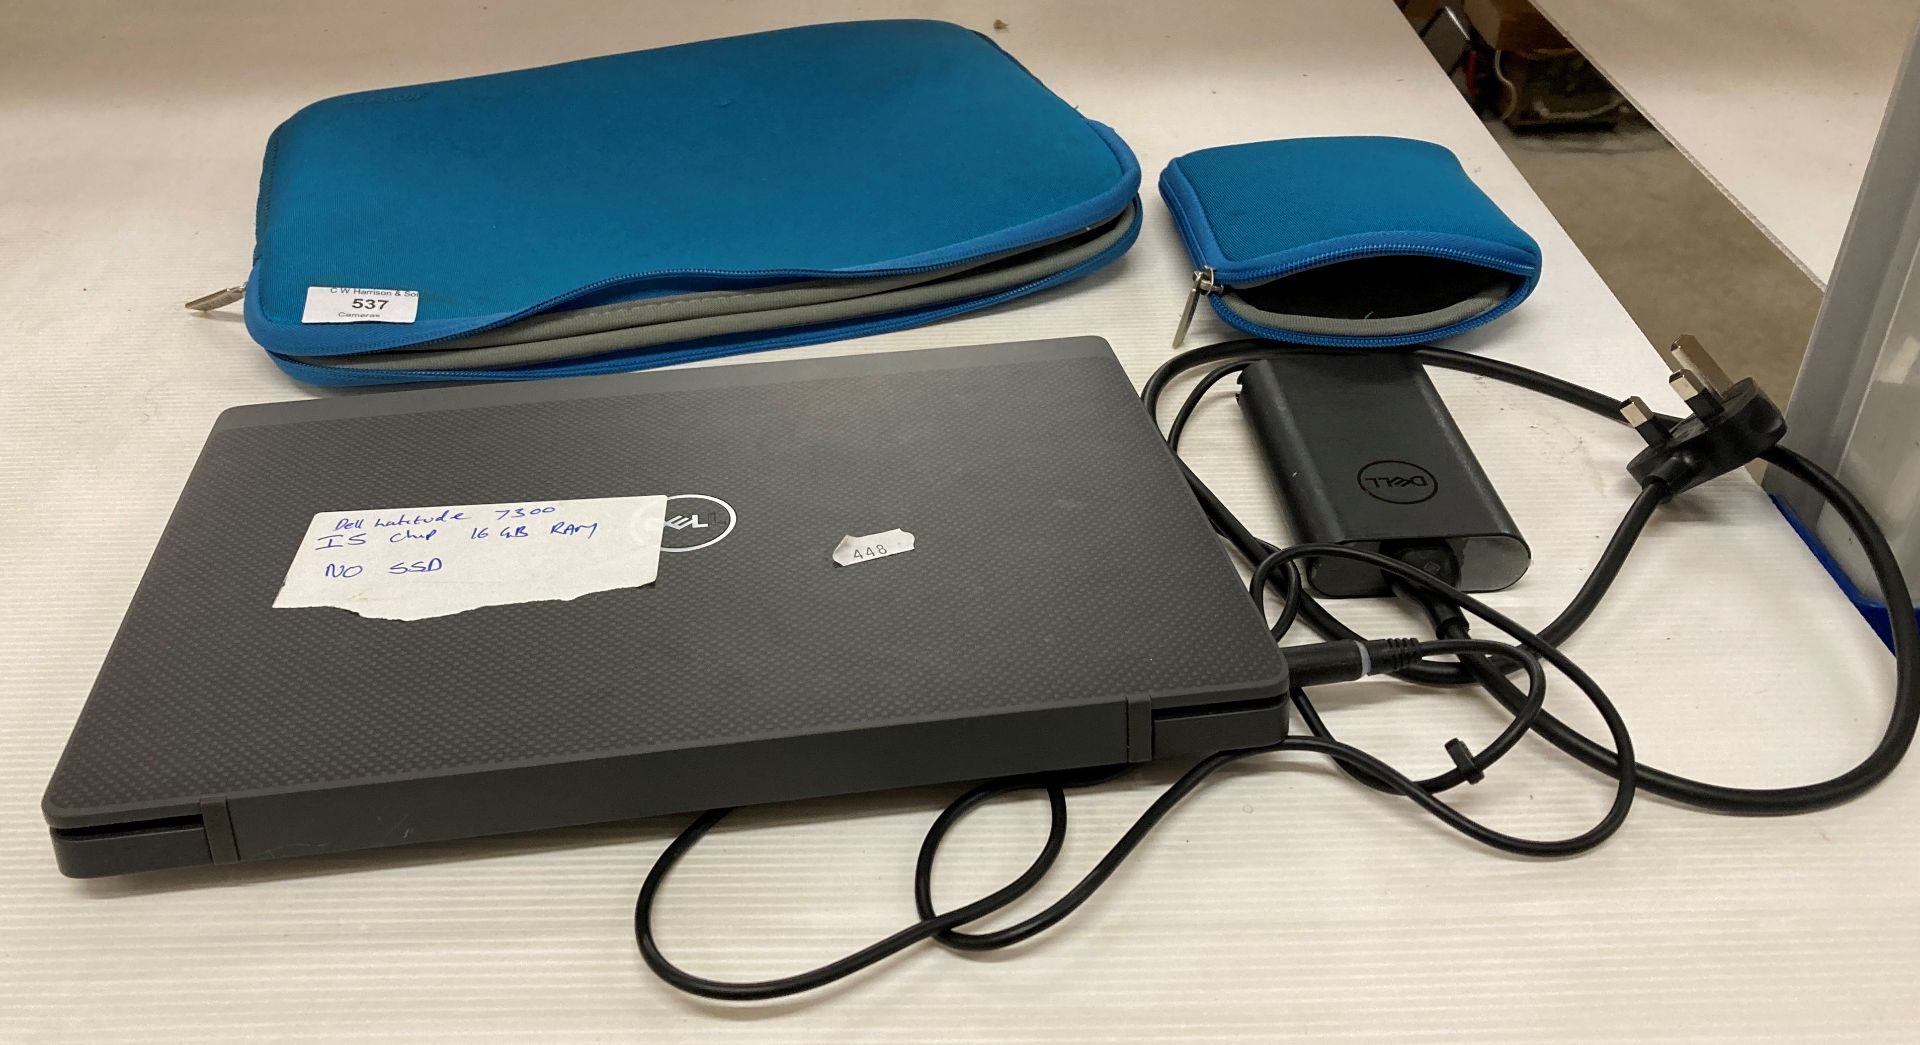 Dell Latitude 7300 Laptop with IS CHIP 16GB RAM (no hard drive) c/w power lead and soft case